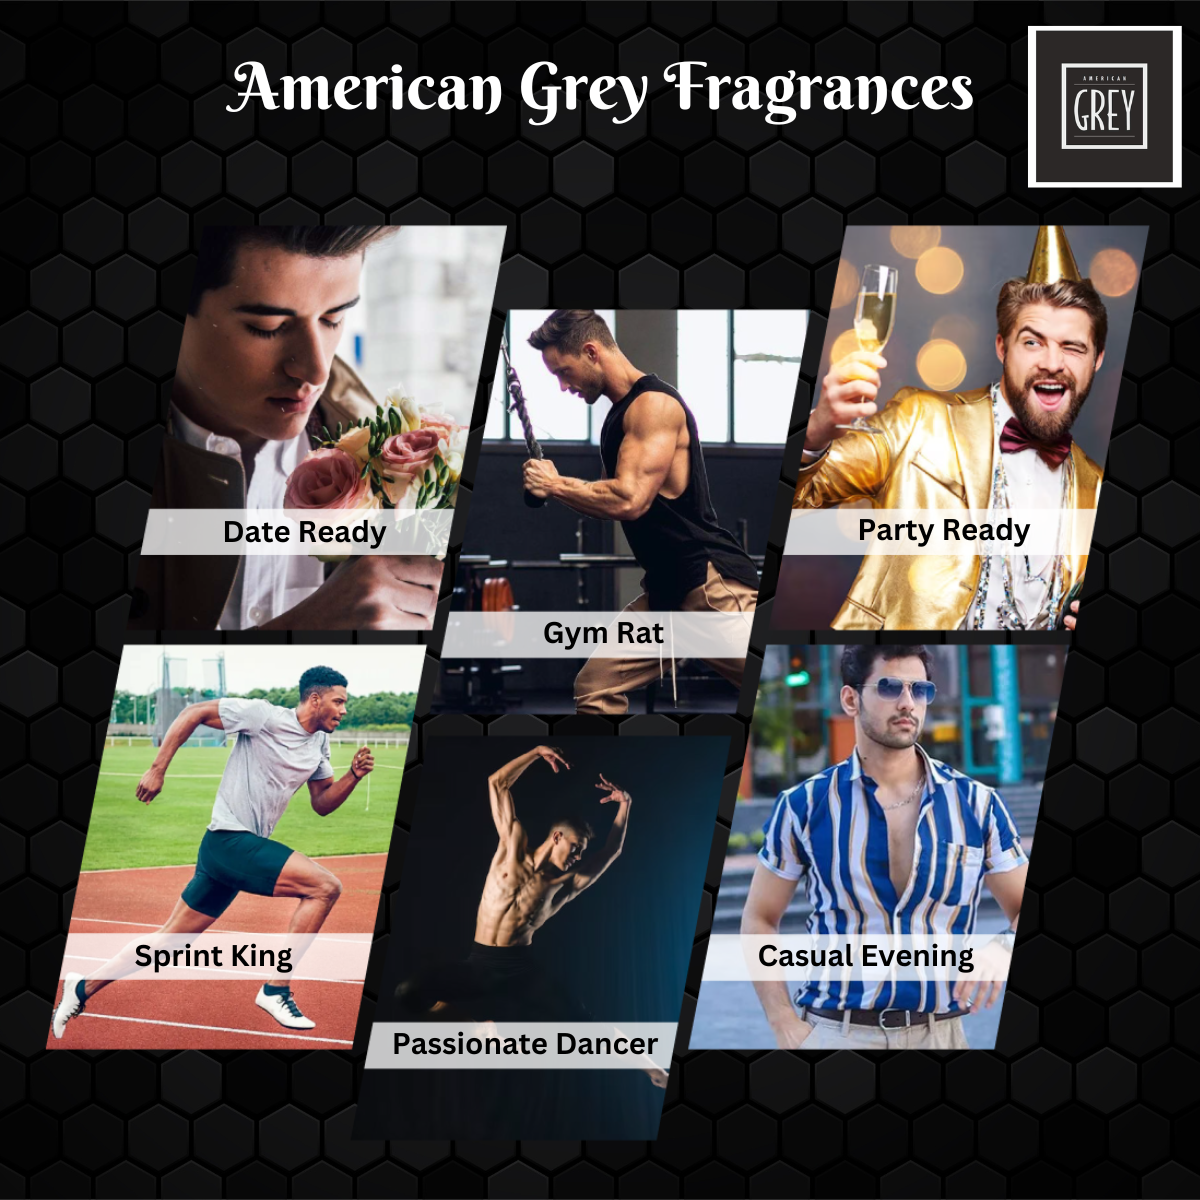 be date ready with american grey perfume spray, be party ready with american grey perfume spray, grooming routine for men, 